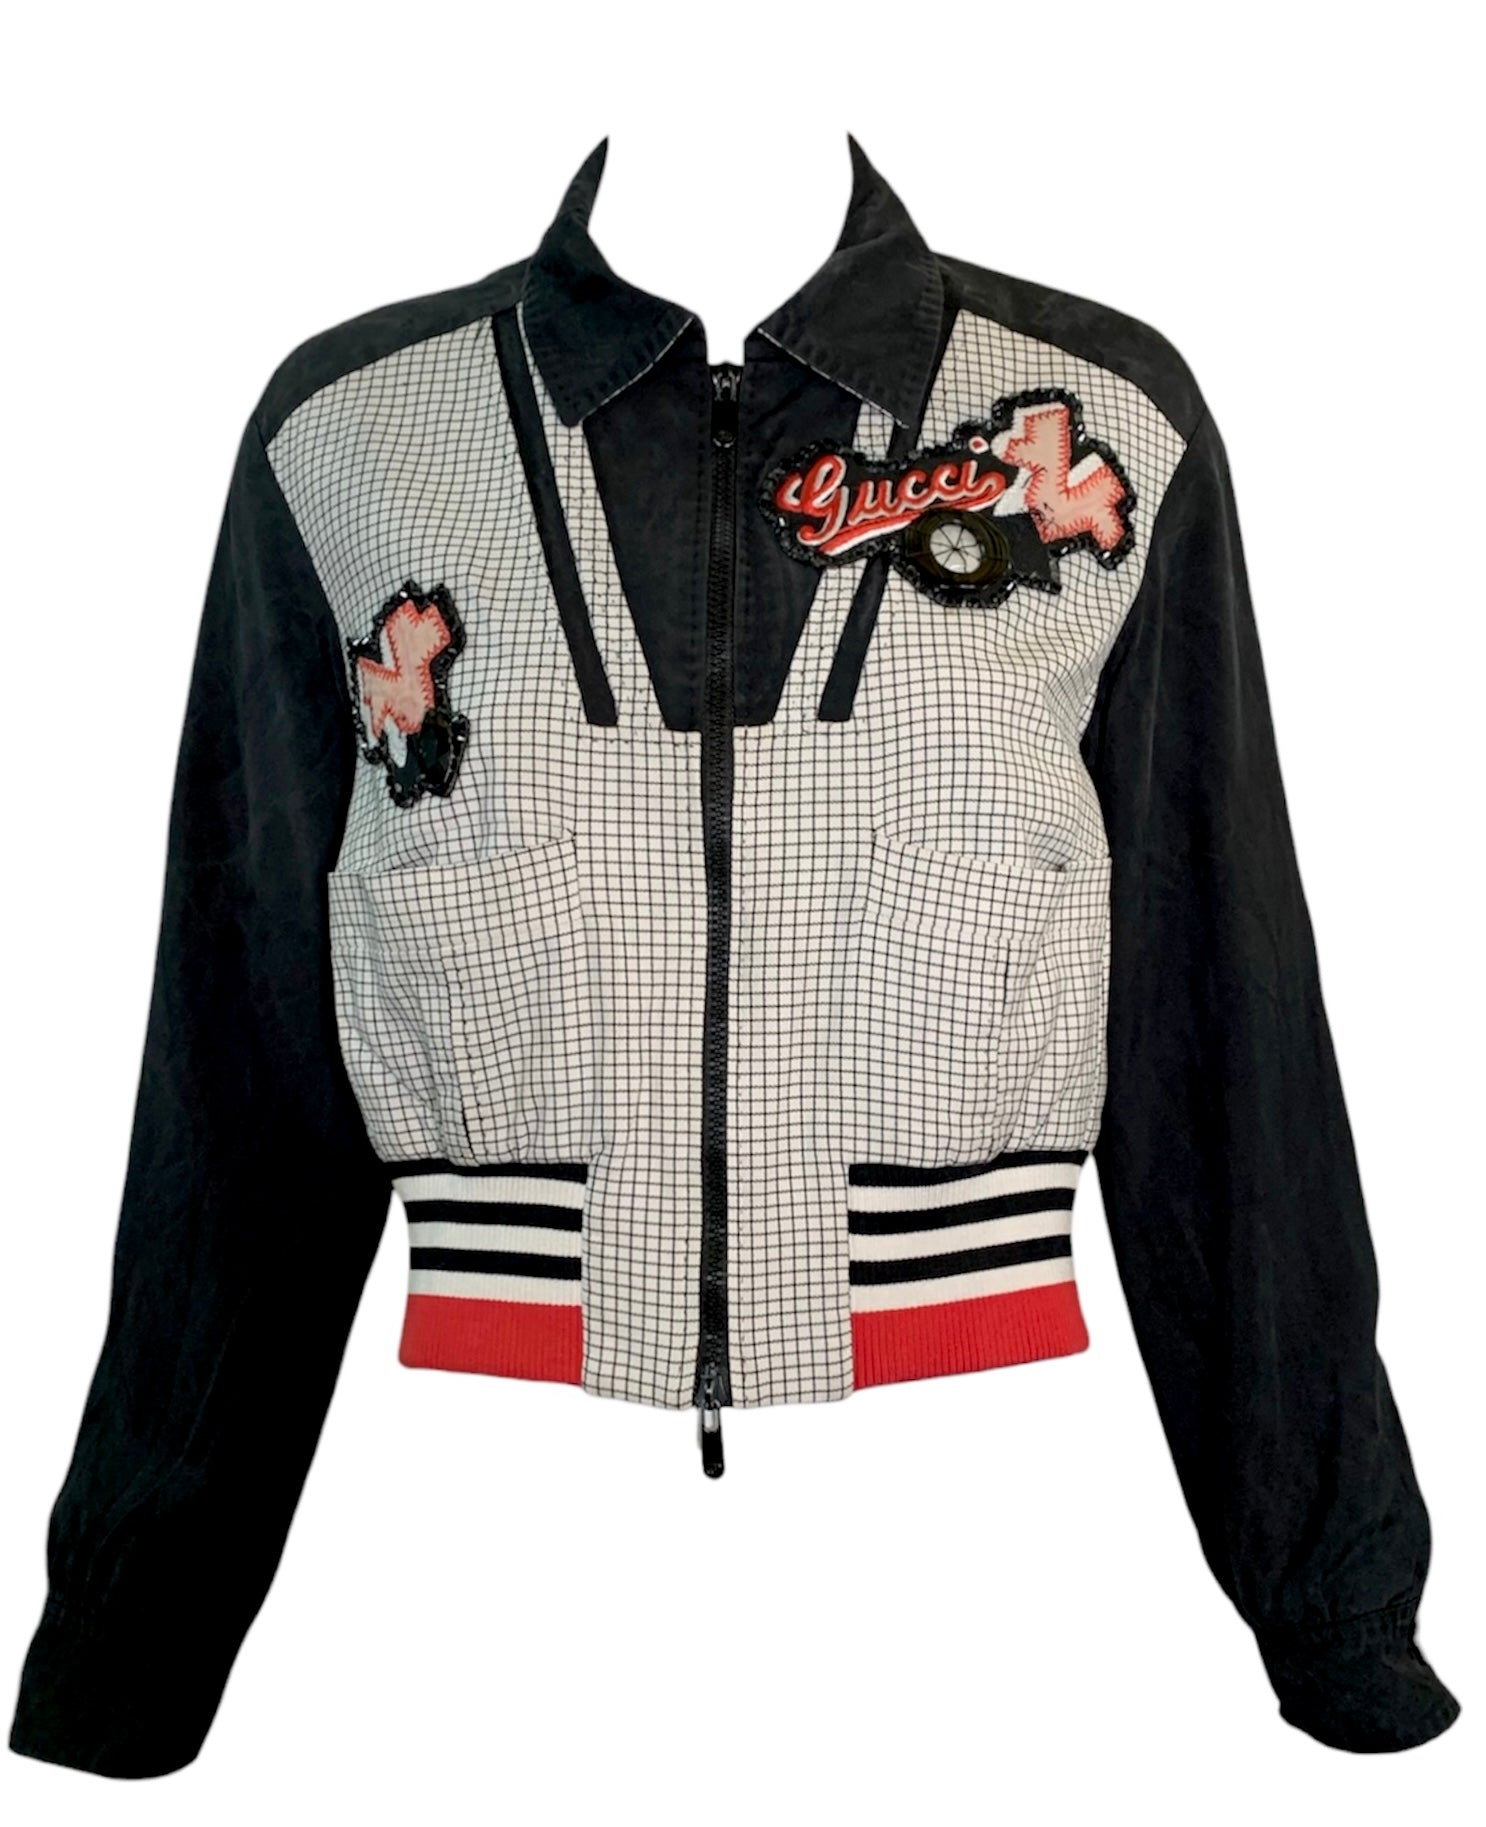 GUCCI Contemporary Bomber Style Jacket with Patches – THE WAY WE WORE